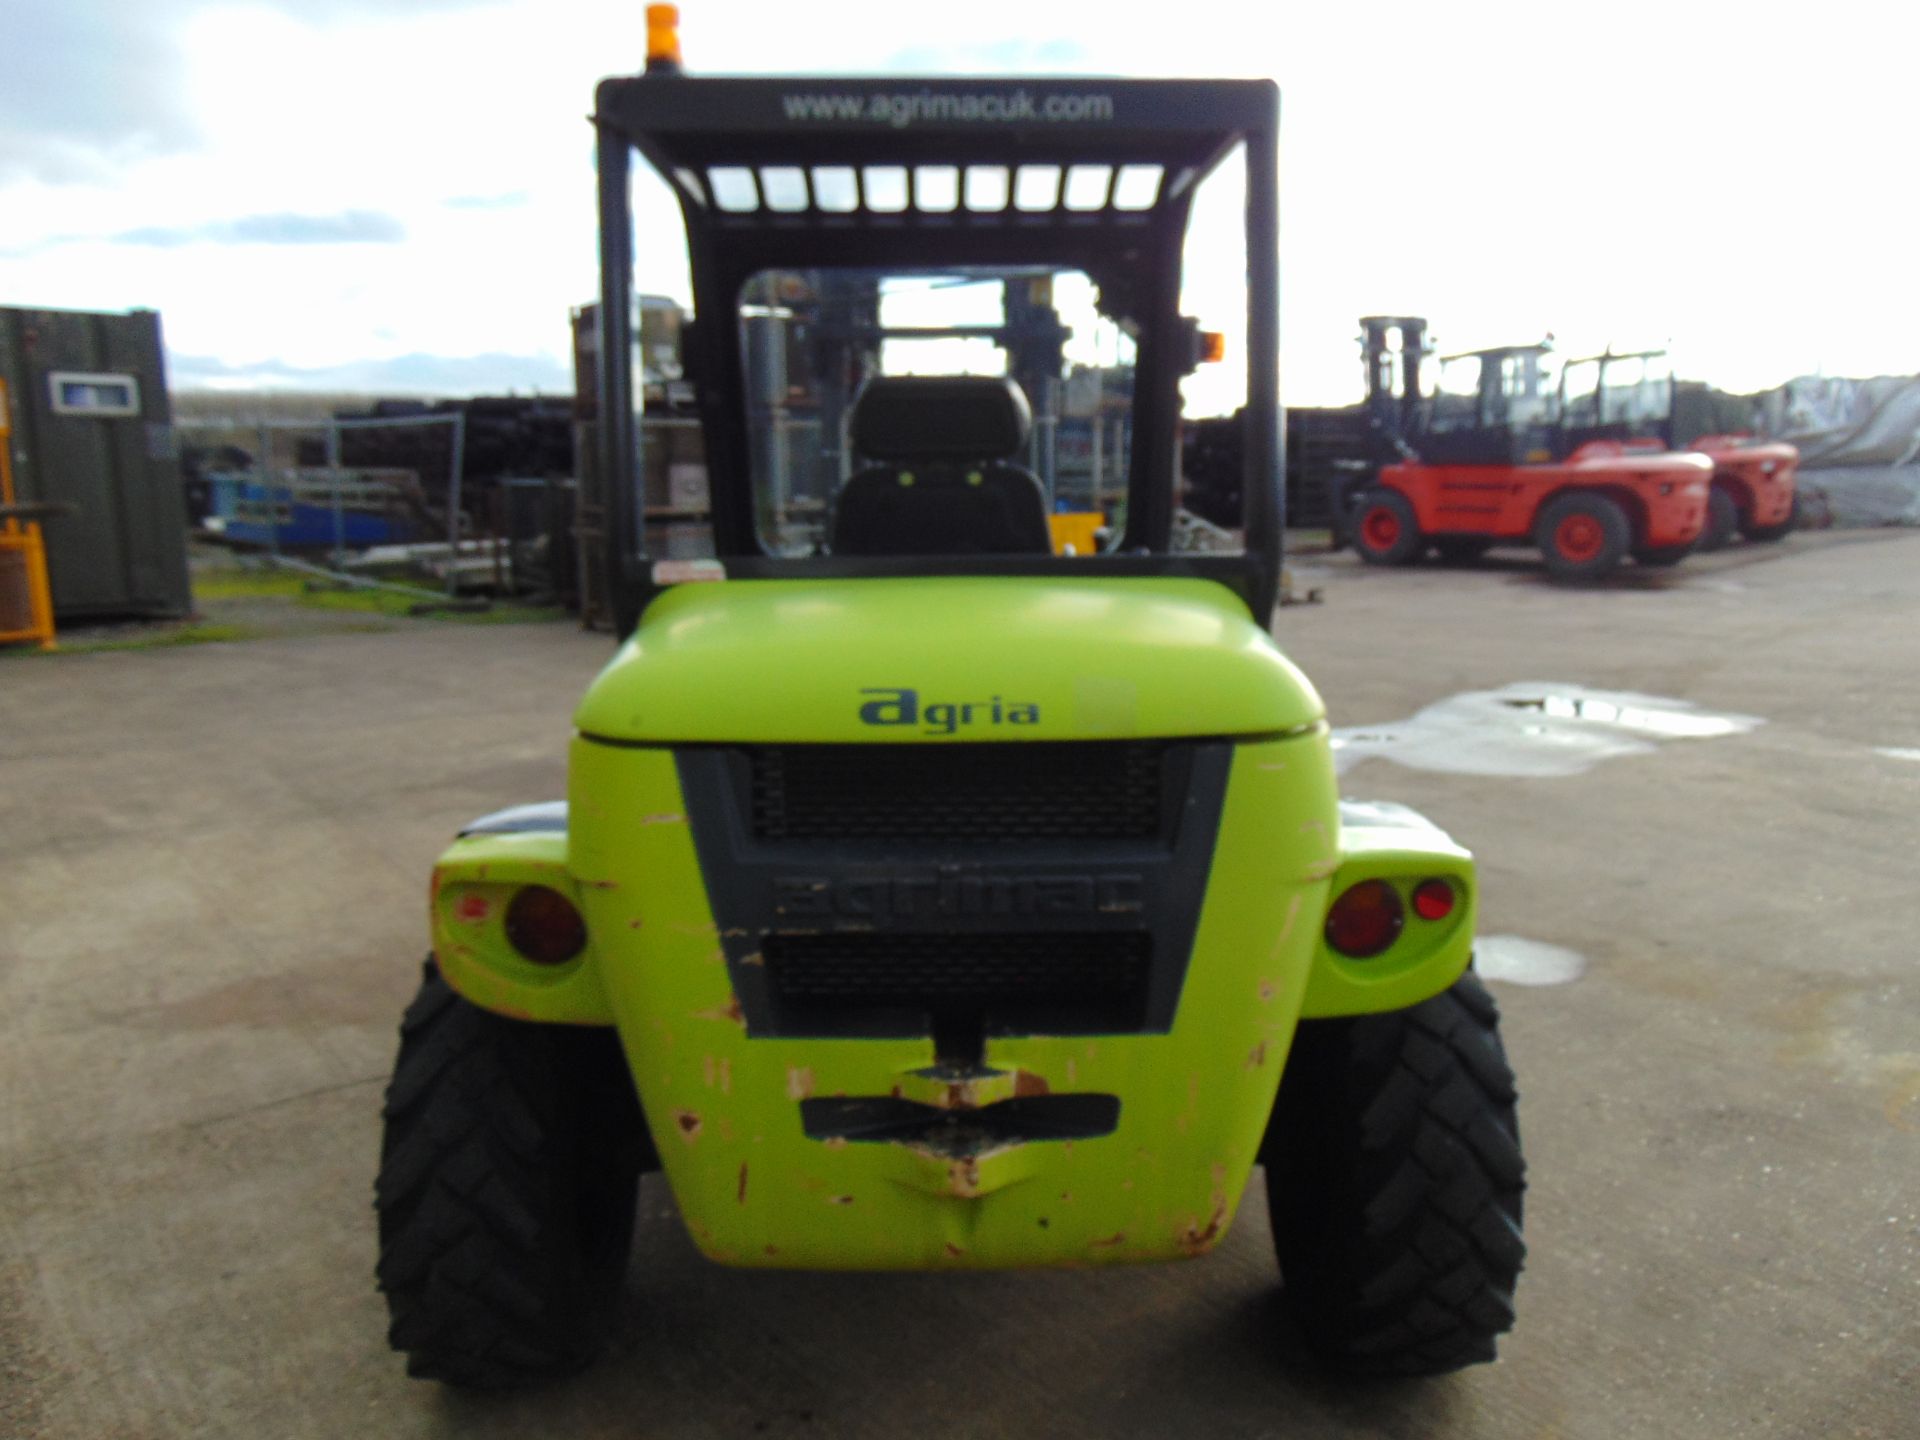 2011 Agrimac Agria TH210 4x4 Rough Terrain Diesel Forklift ONLY 1,918 HOURS!!! - Image 8 of 30